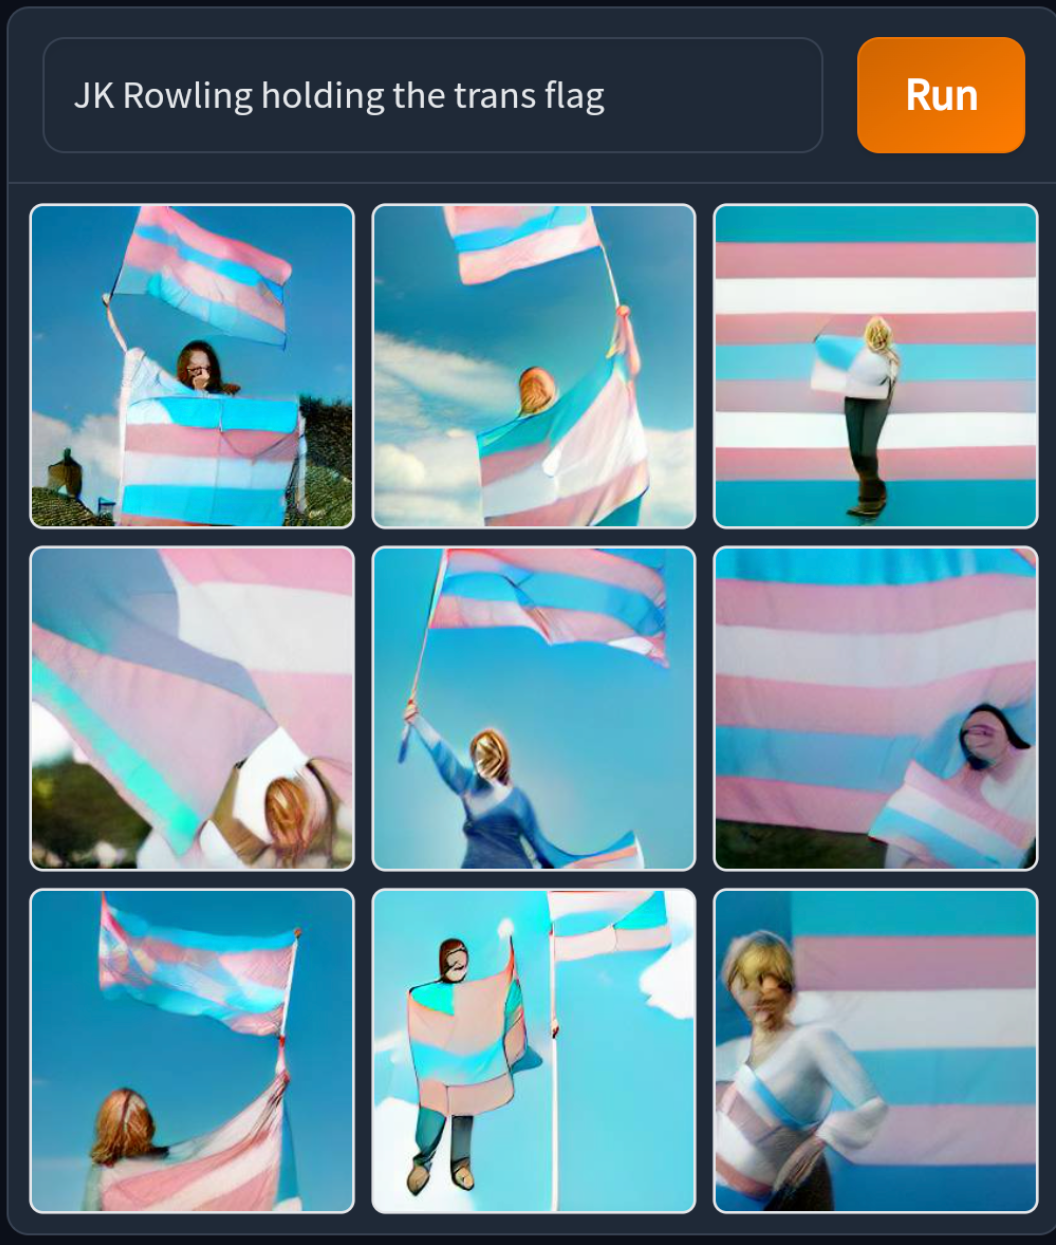 dalle_rowling_trans_flag.png